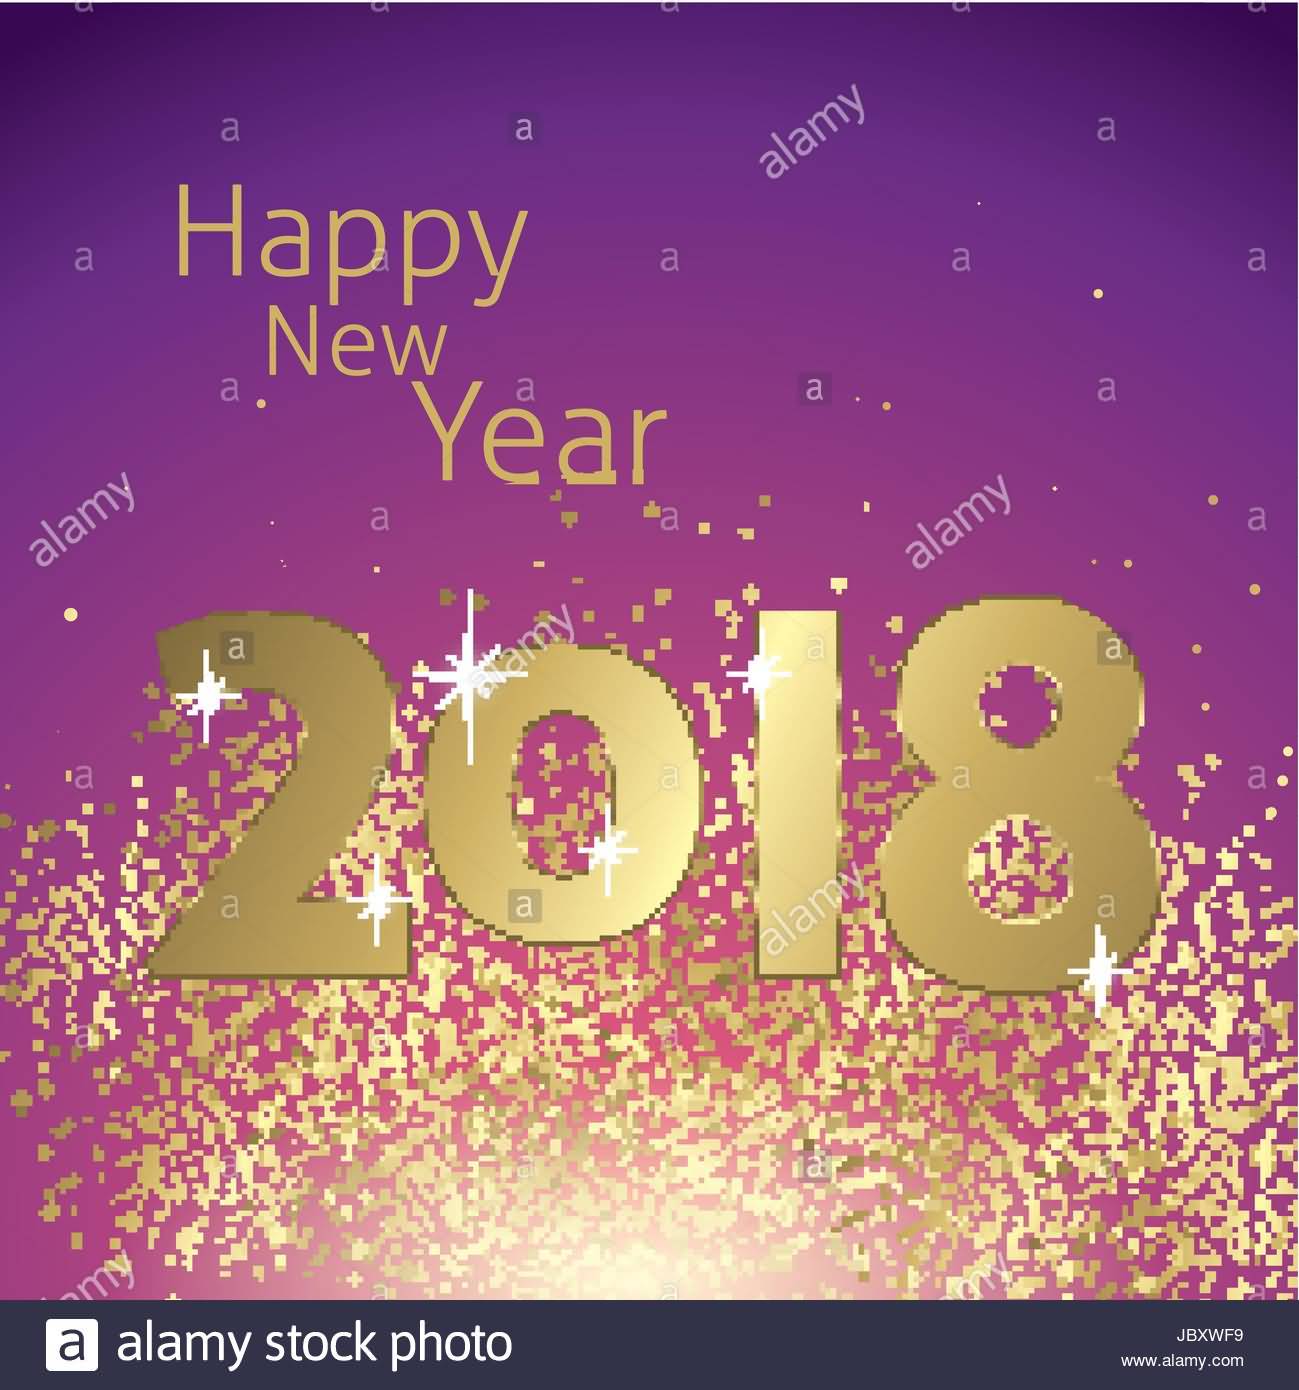 Happy New Year 2018 Cards Image Picture Photo Wallpaper 03